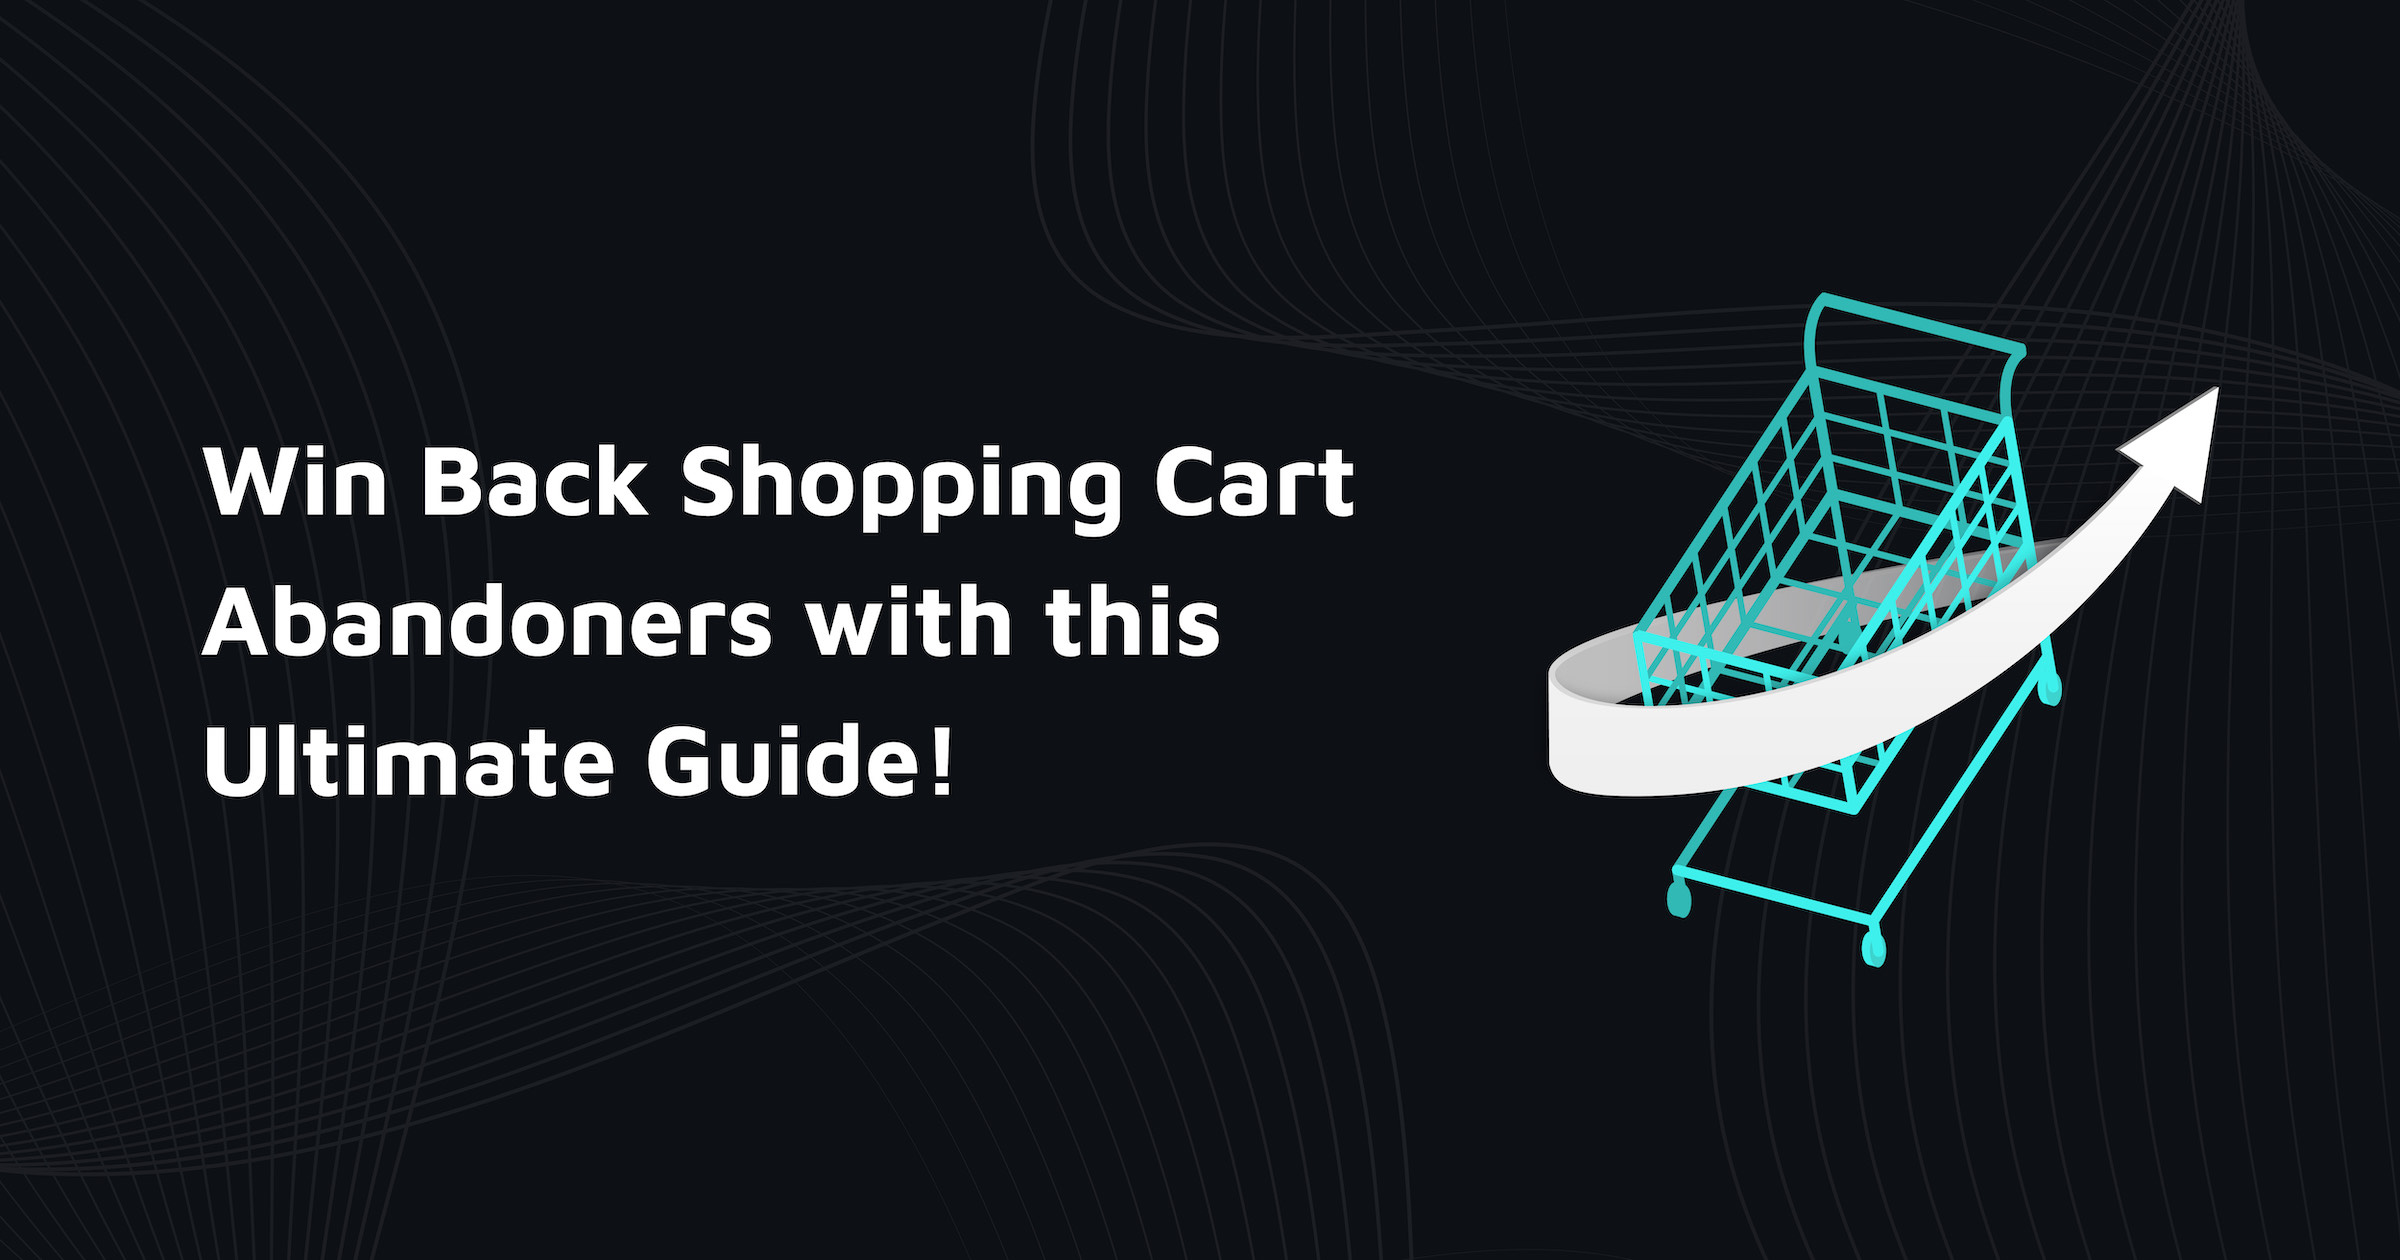 The Ultimate Guide to Shopping Cart Abandonment - OptiMonk Blog